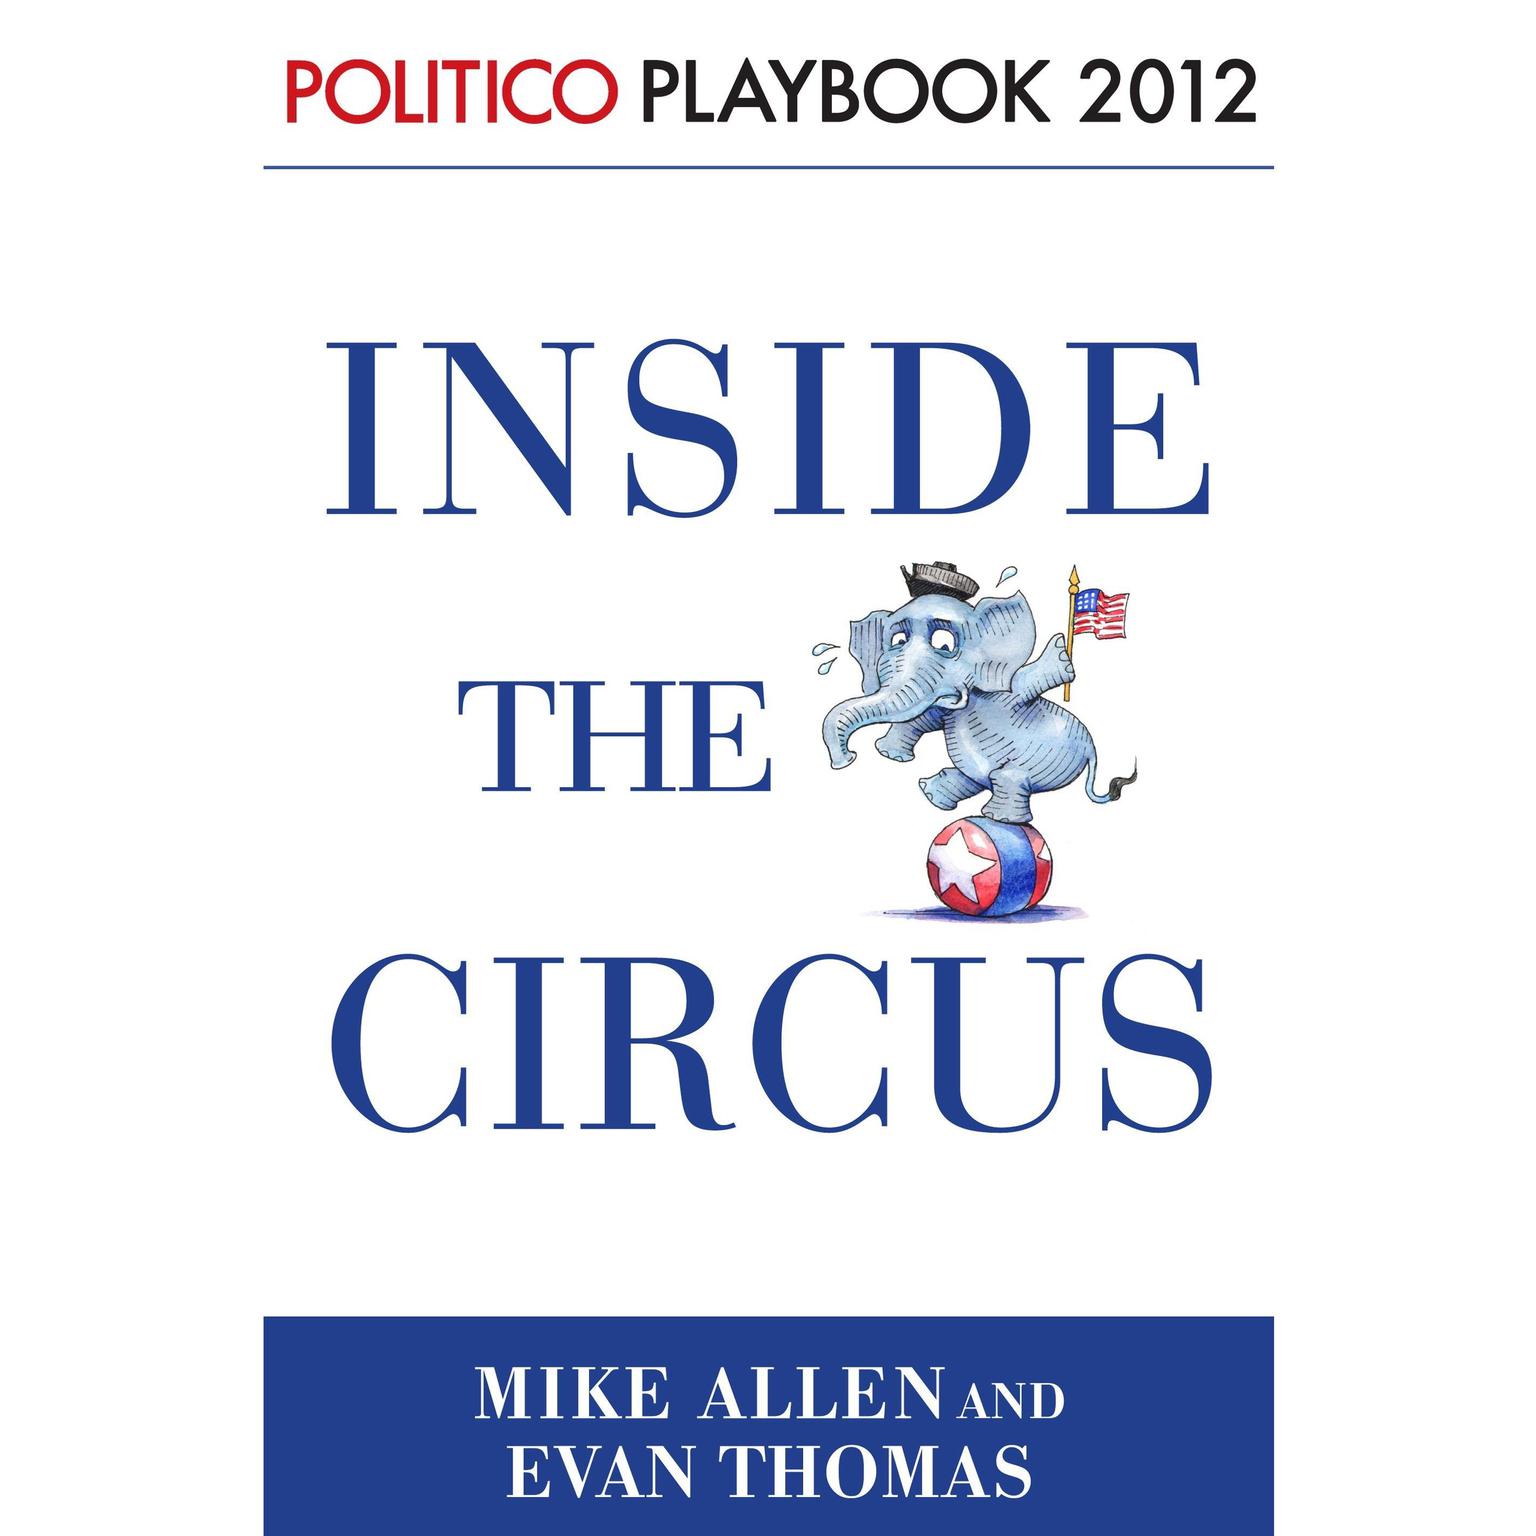 Inside the Circus--Romney, Santorum and the GOP Race: Playbook 2012 (POLITICO Inside Election 2012): Politico Playbook 2012 Audiobook, by Mike Allen